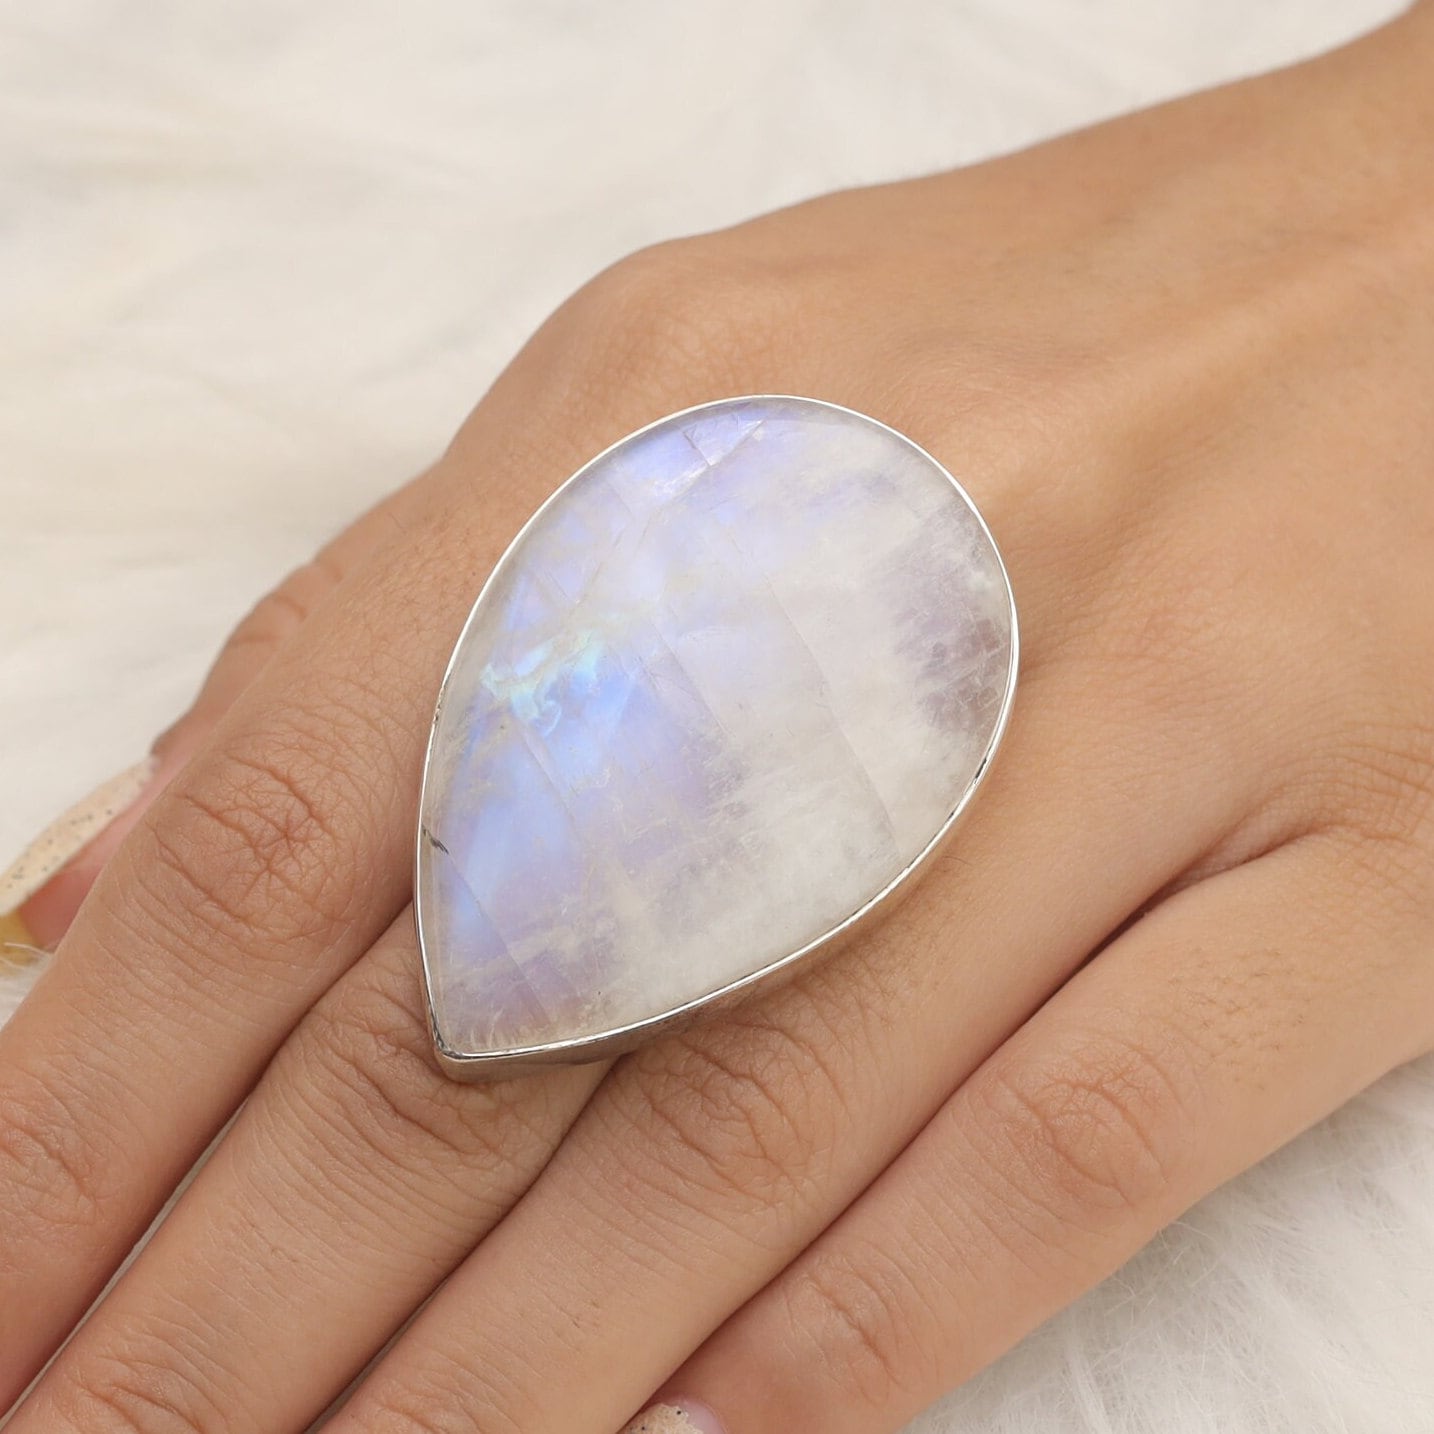 Rainbow Moonstone Ring, 925 Sterling Silver Ring, June Birthstone Ring, Big Pear Shaped Ring, Handmade Jewelry, Women Ring, Gift for Her